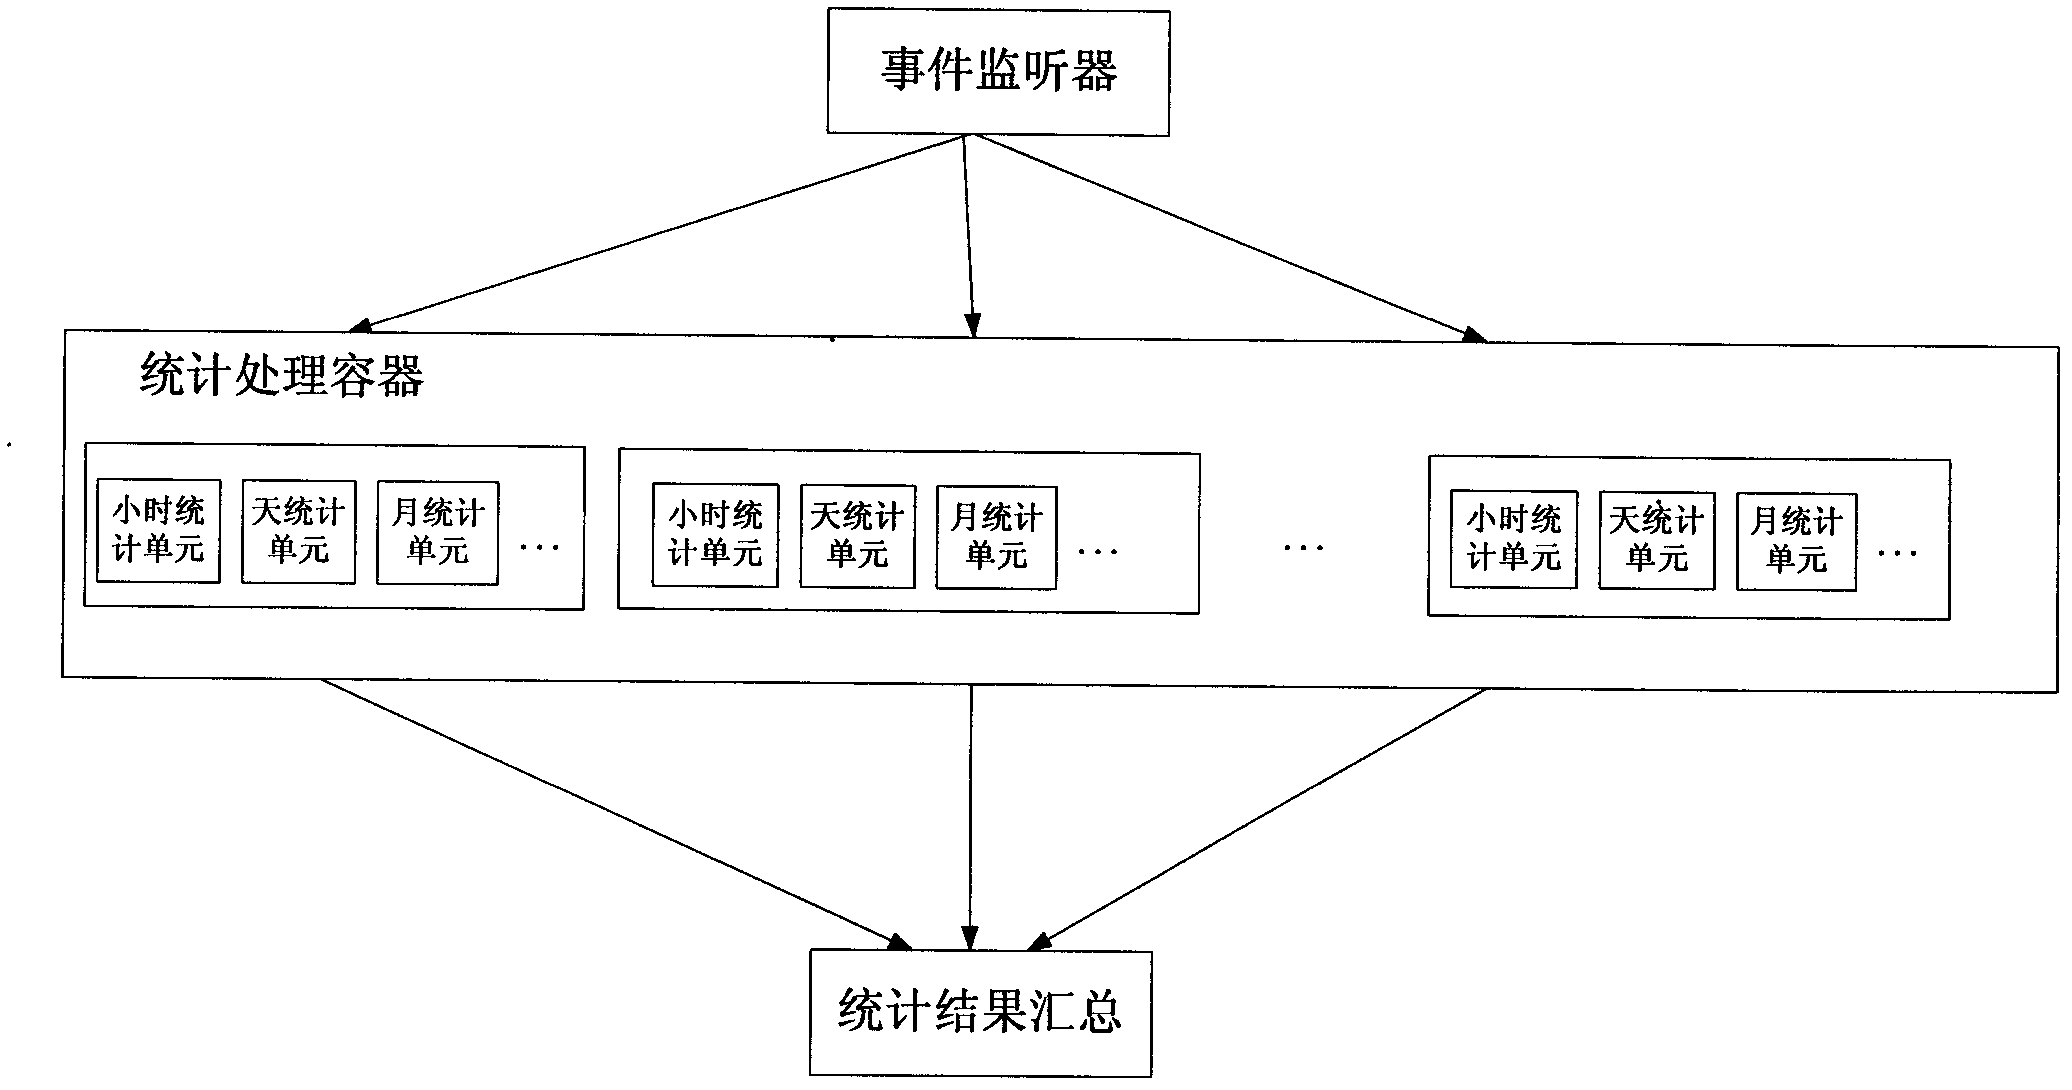 Detection and determination method of network navy